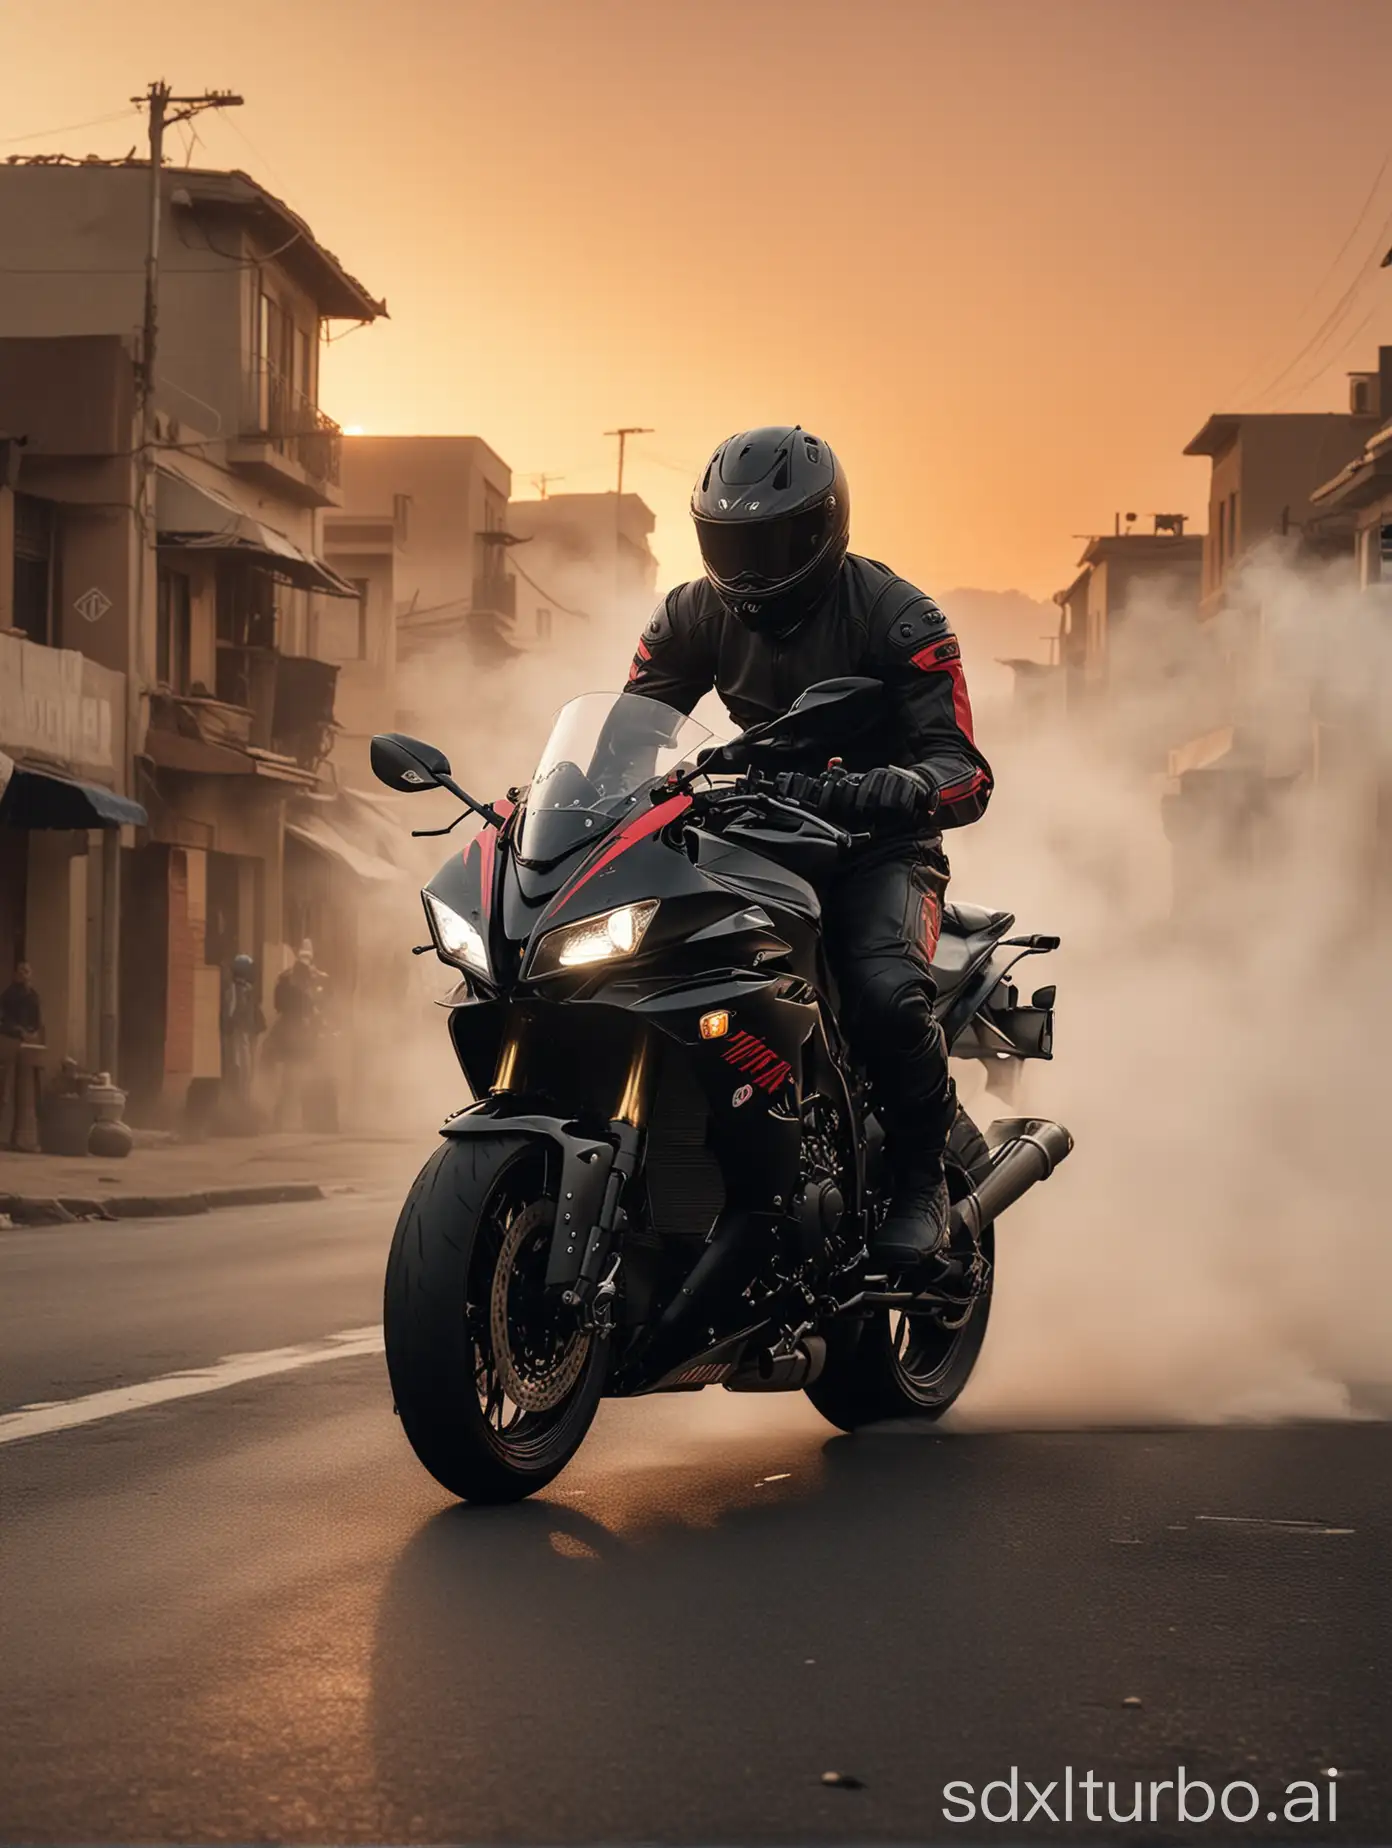 A captivating image of an 18-year-old young man expertly riding a sleek black Yamaha R1 motorcycle. He is fully geared up in a black protective suit and helmet, both adorned with subtle red accents. The motorcycle roars to life as it races down a deserted street during a sunset, leaving a trail of smoke and a sense of adrenaline in its wake.